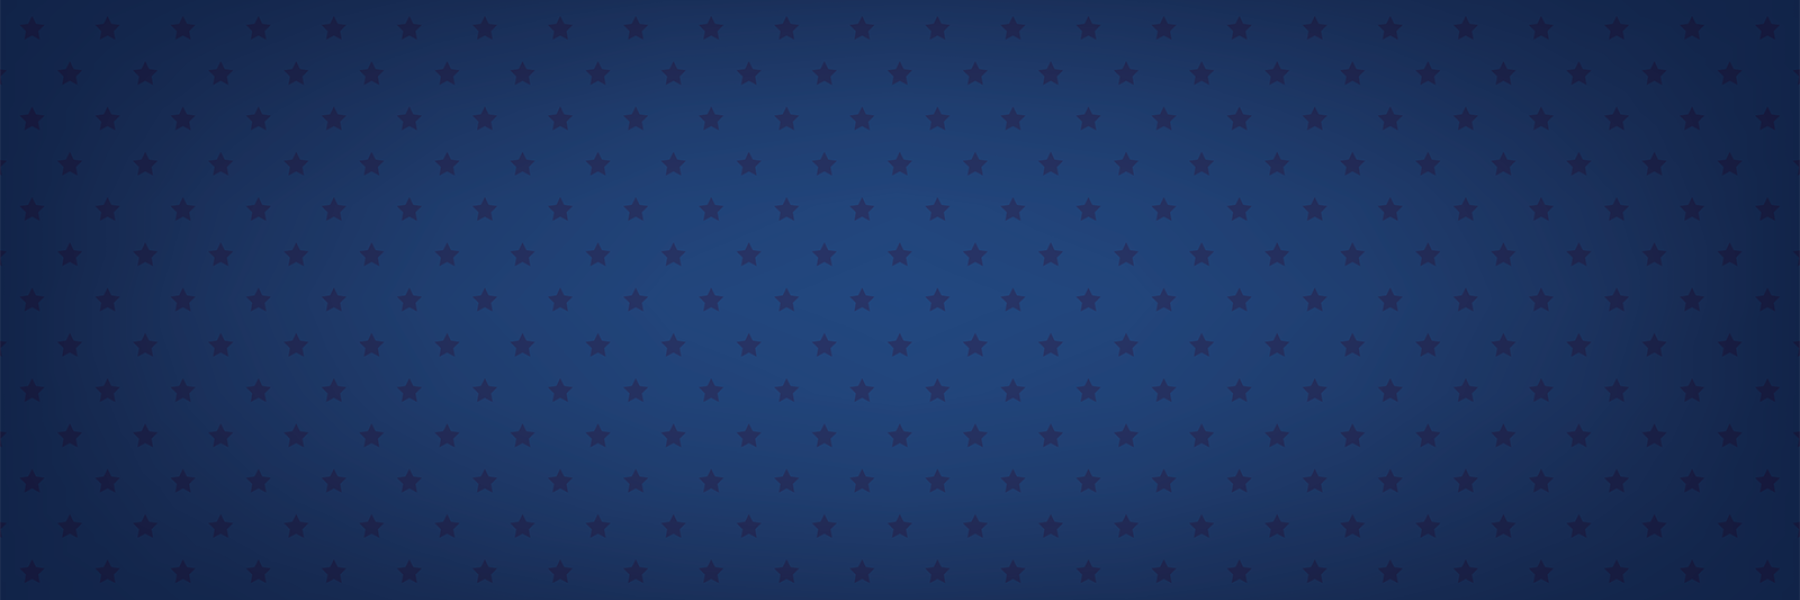 A navy blue background with stars